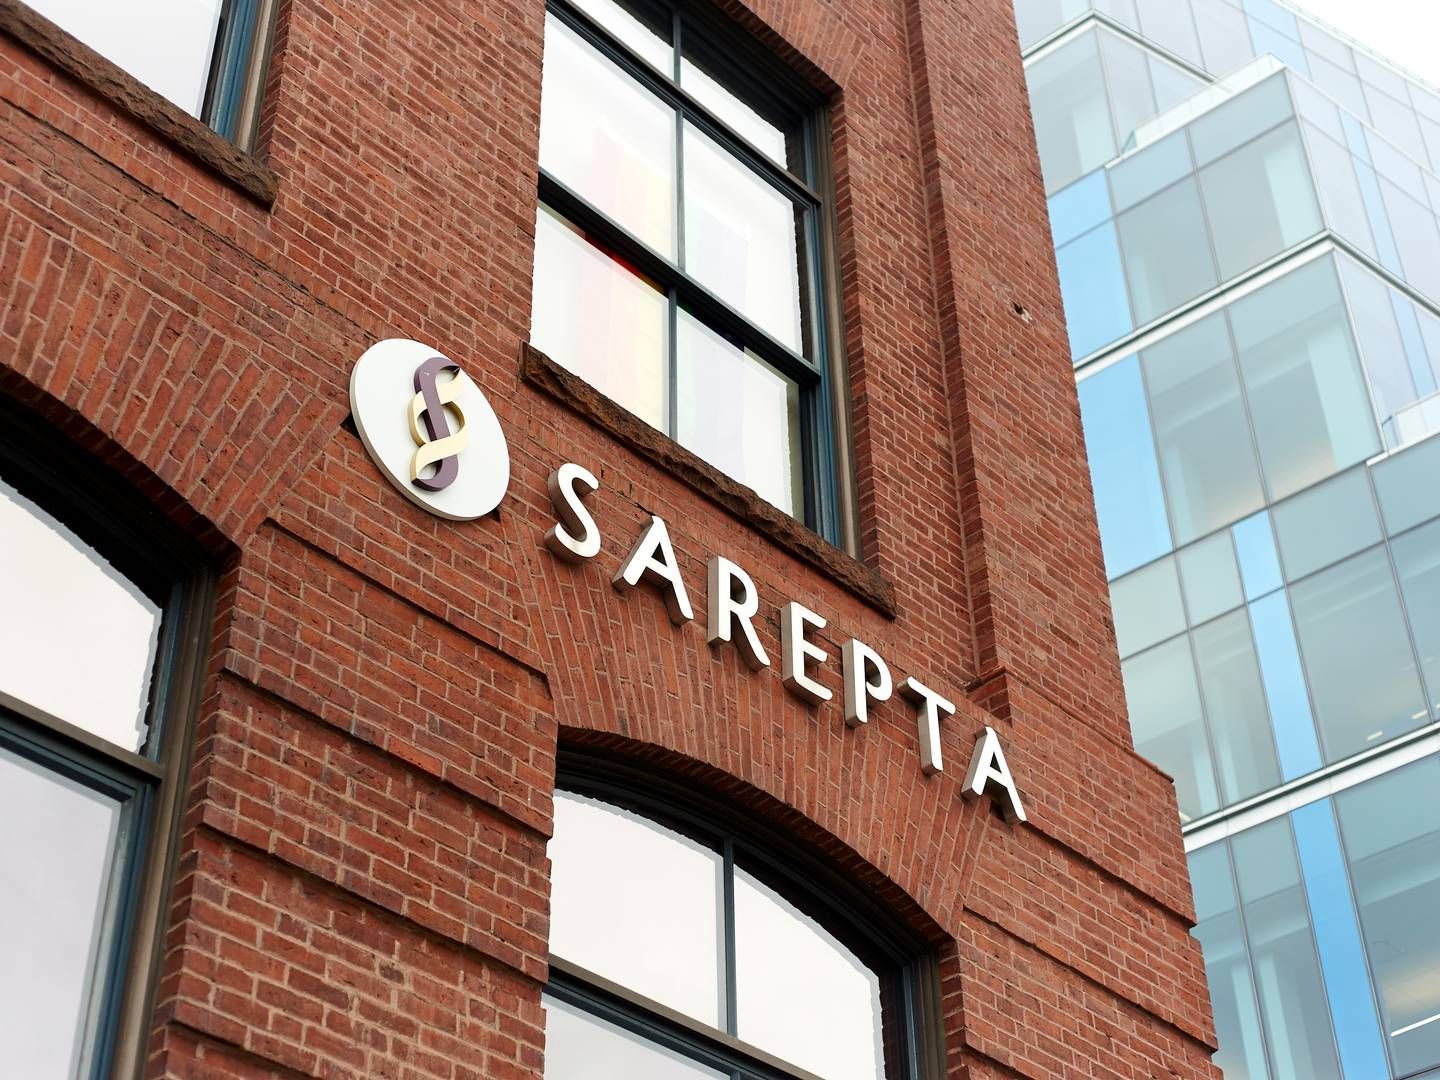 A muscular dystrophy drug from the pharmaceutical company Sarepta tops the price list of expensive new drugs. | Photo: Sarepta / PR